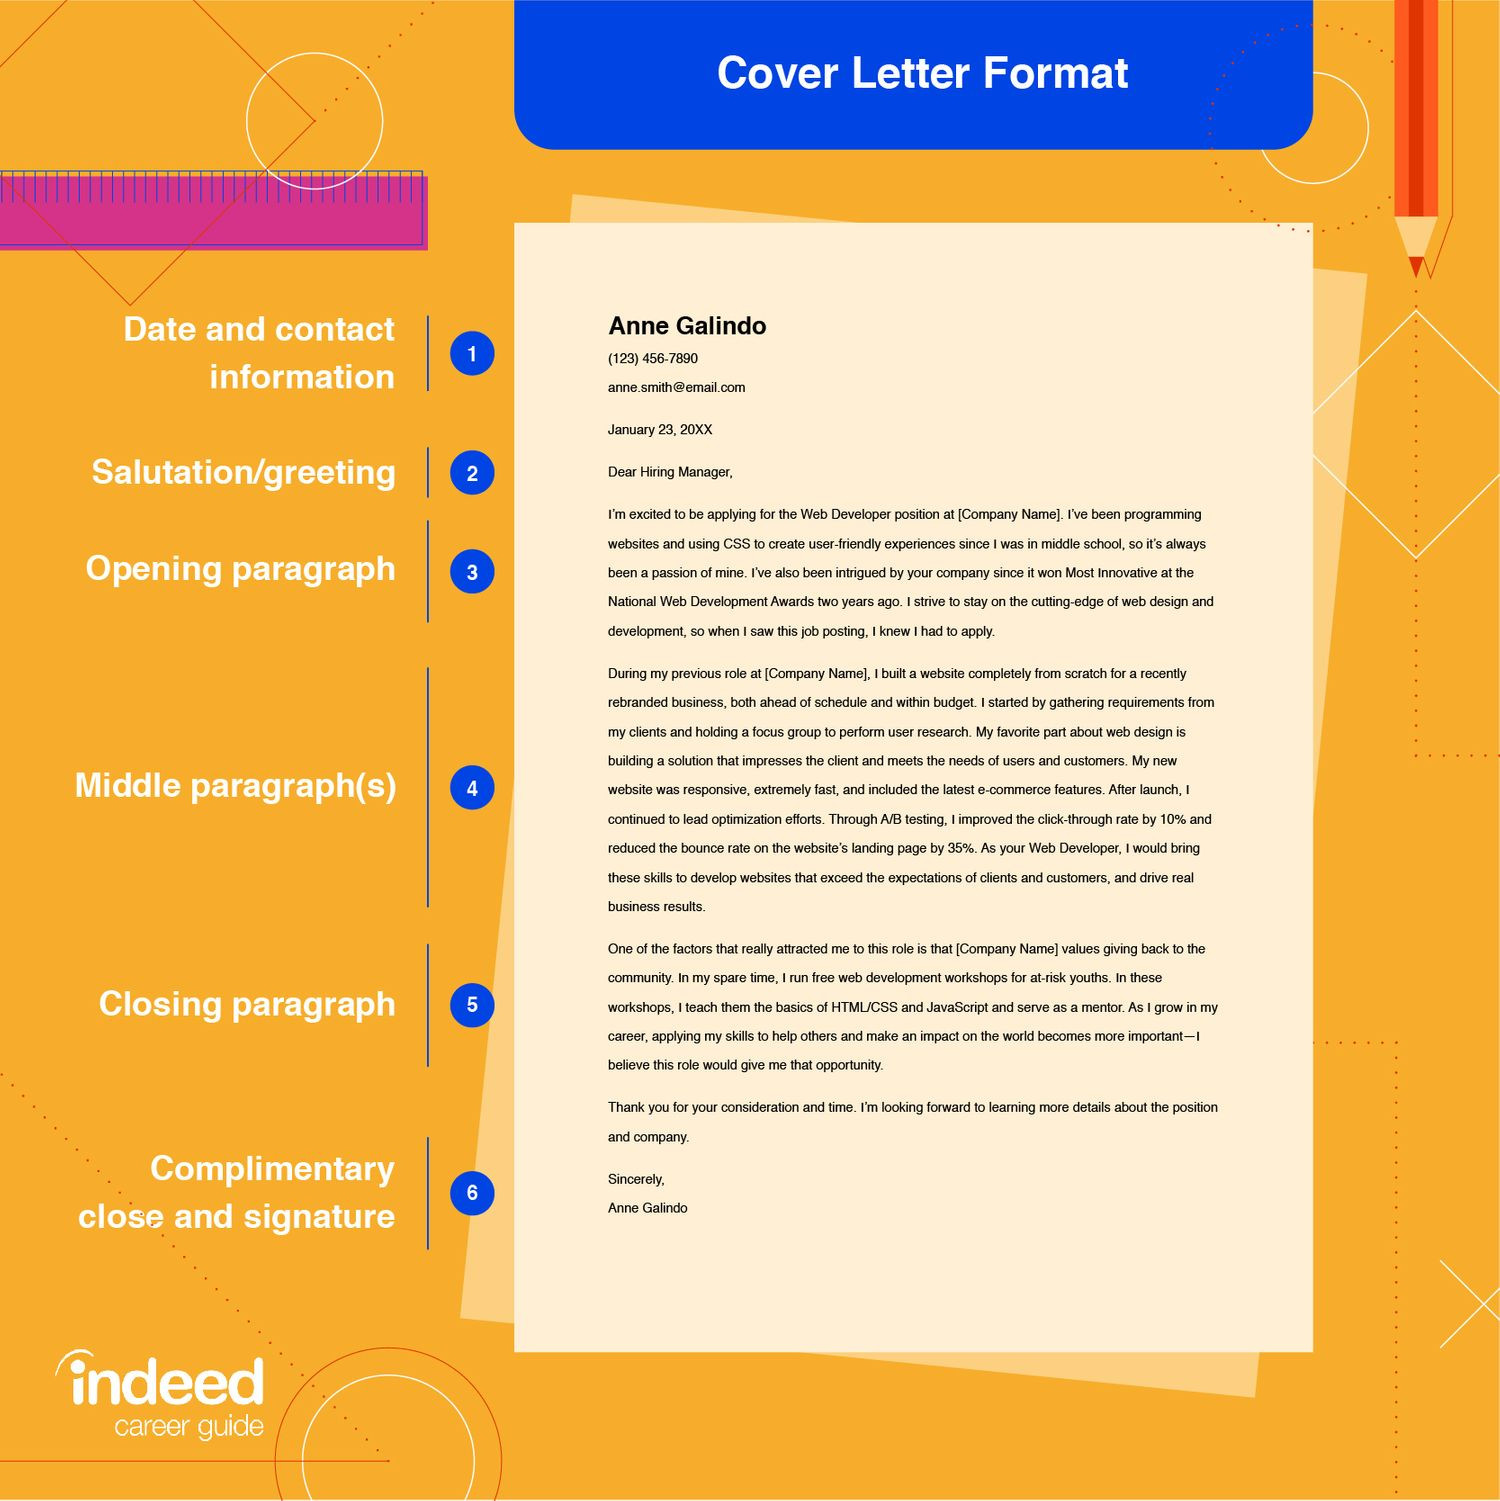 Sample Letter for Sending Resume to Friend How to Include A Referral In Your Cover Letter Indeed.com